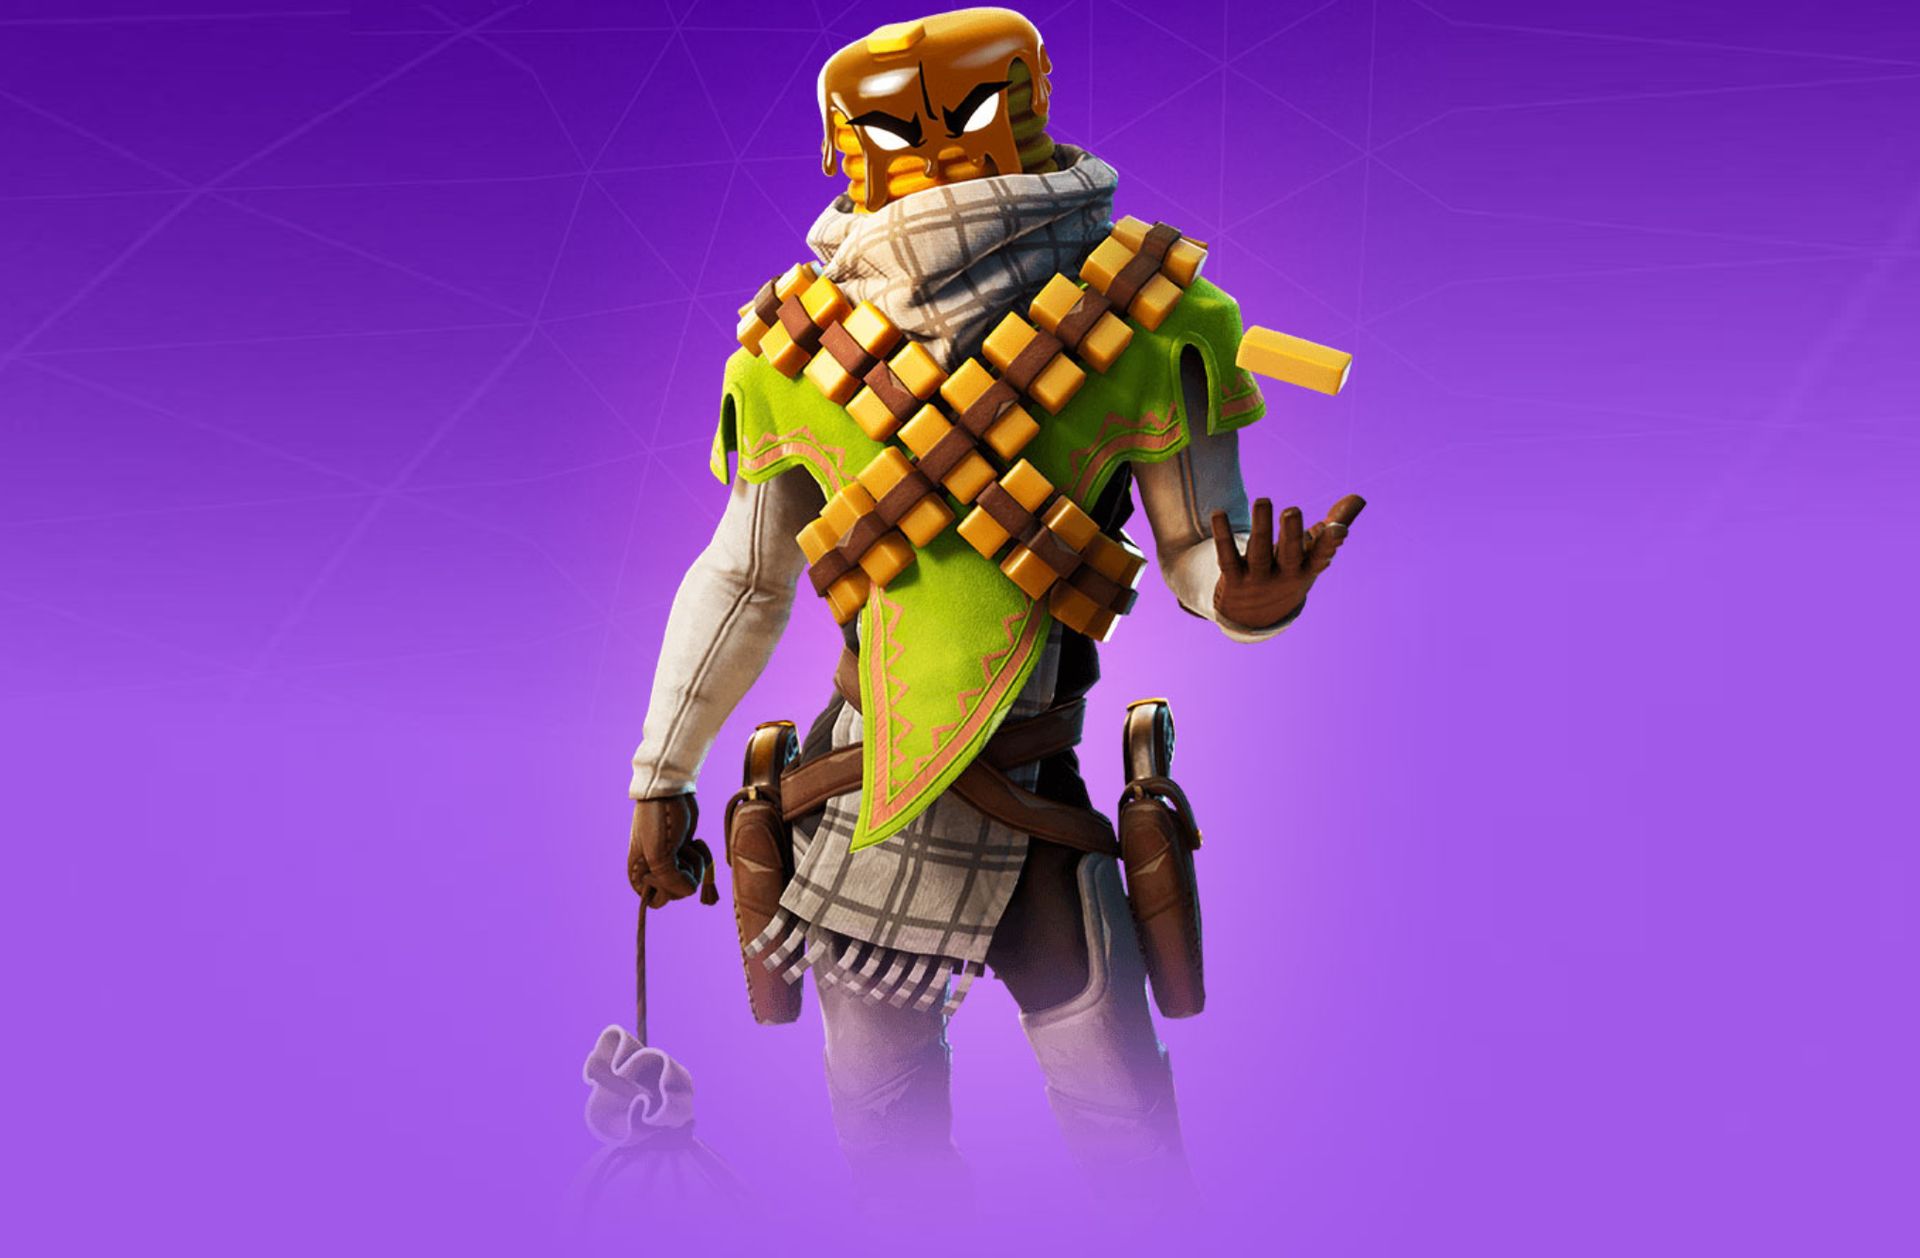 We are witnessing a new Fortnite x Fall Guys collaboration, in this guide we are going to show you how get Major Mancake skin in Fortnite. Not only that, Fortnite Crown Clash challenge rewards are also really worth to take a look at.